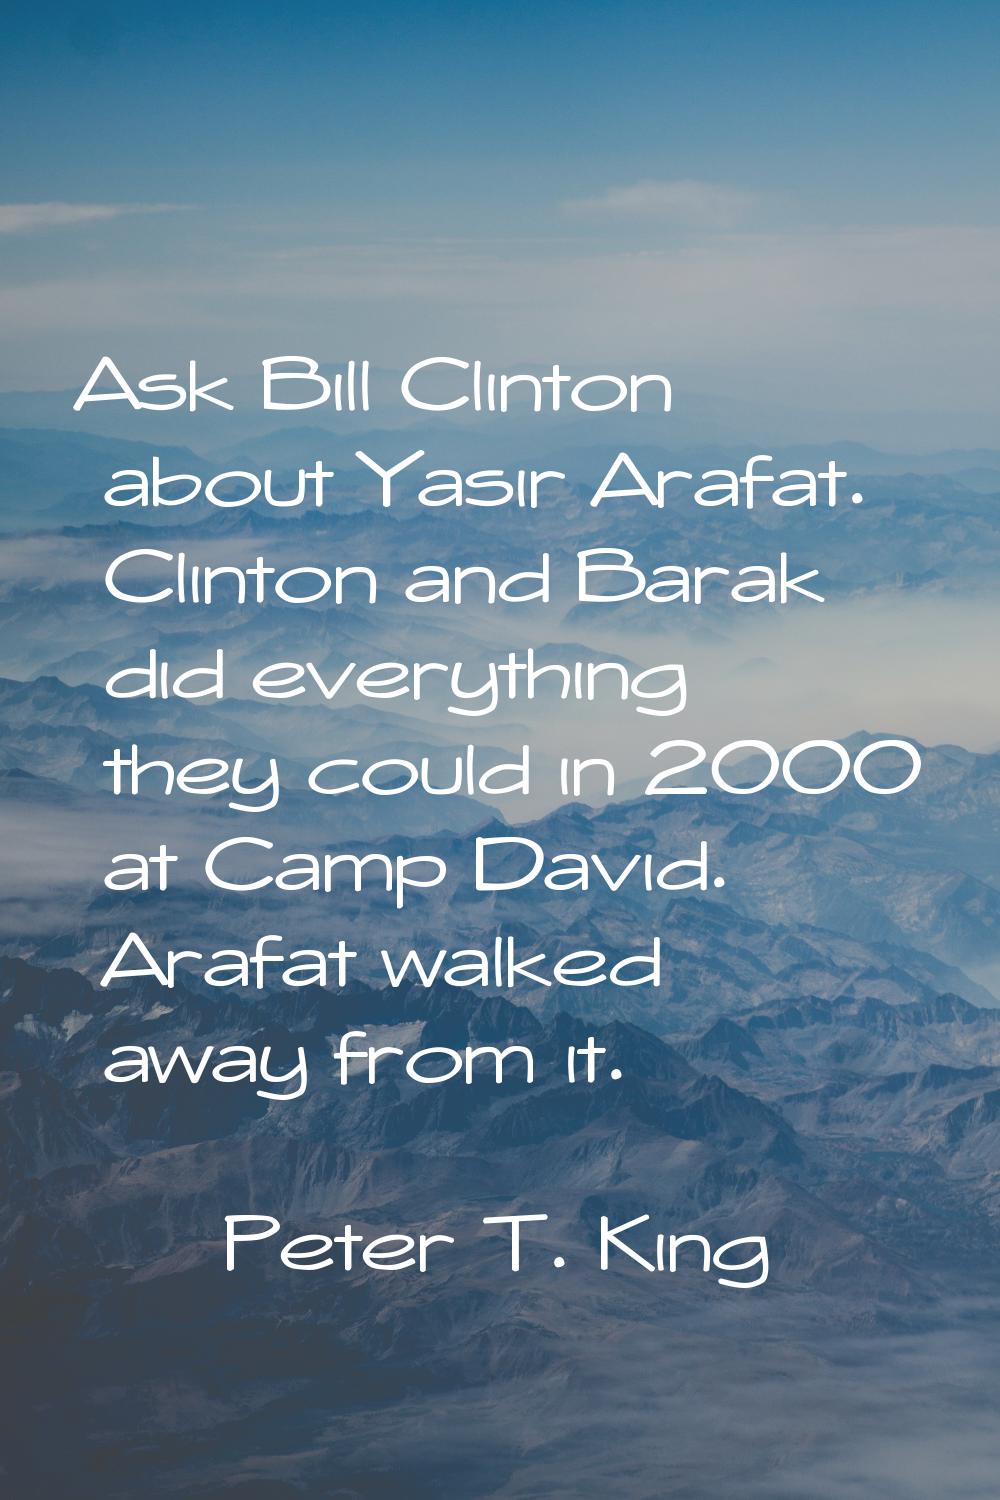 Ask Bill Clinton about Yasir Arafat. Clinton and Barak did everything they could in 2000 at Camp Da